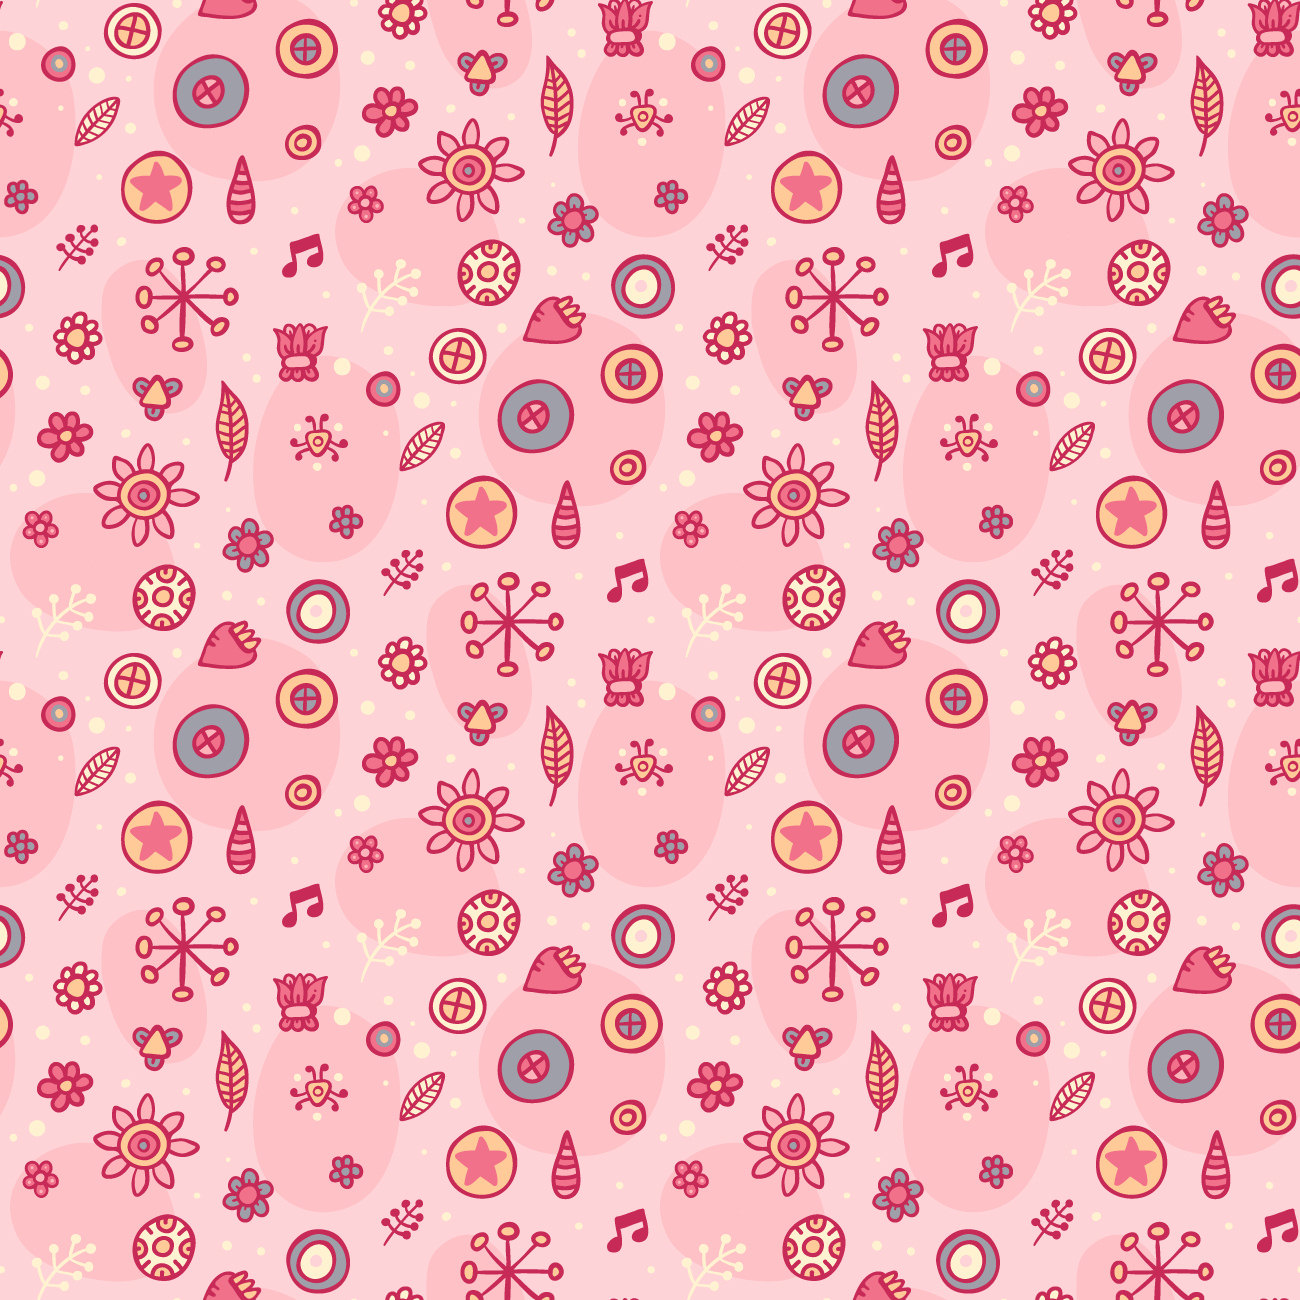 Download High Res Free Photoshop Pink Floral Pattern